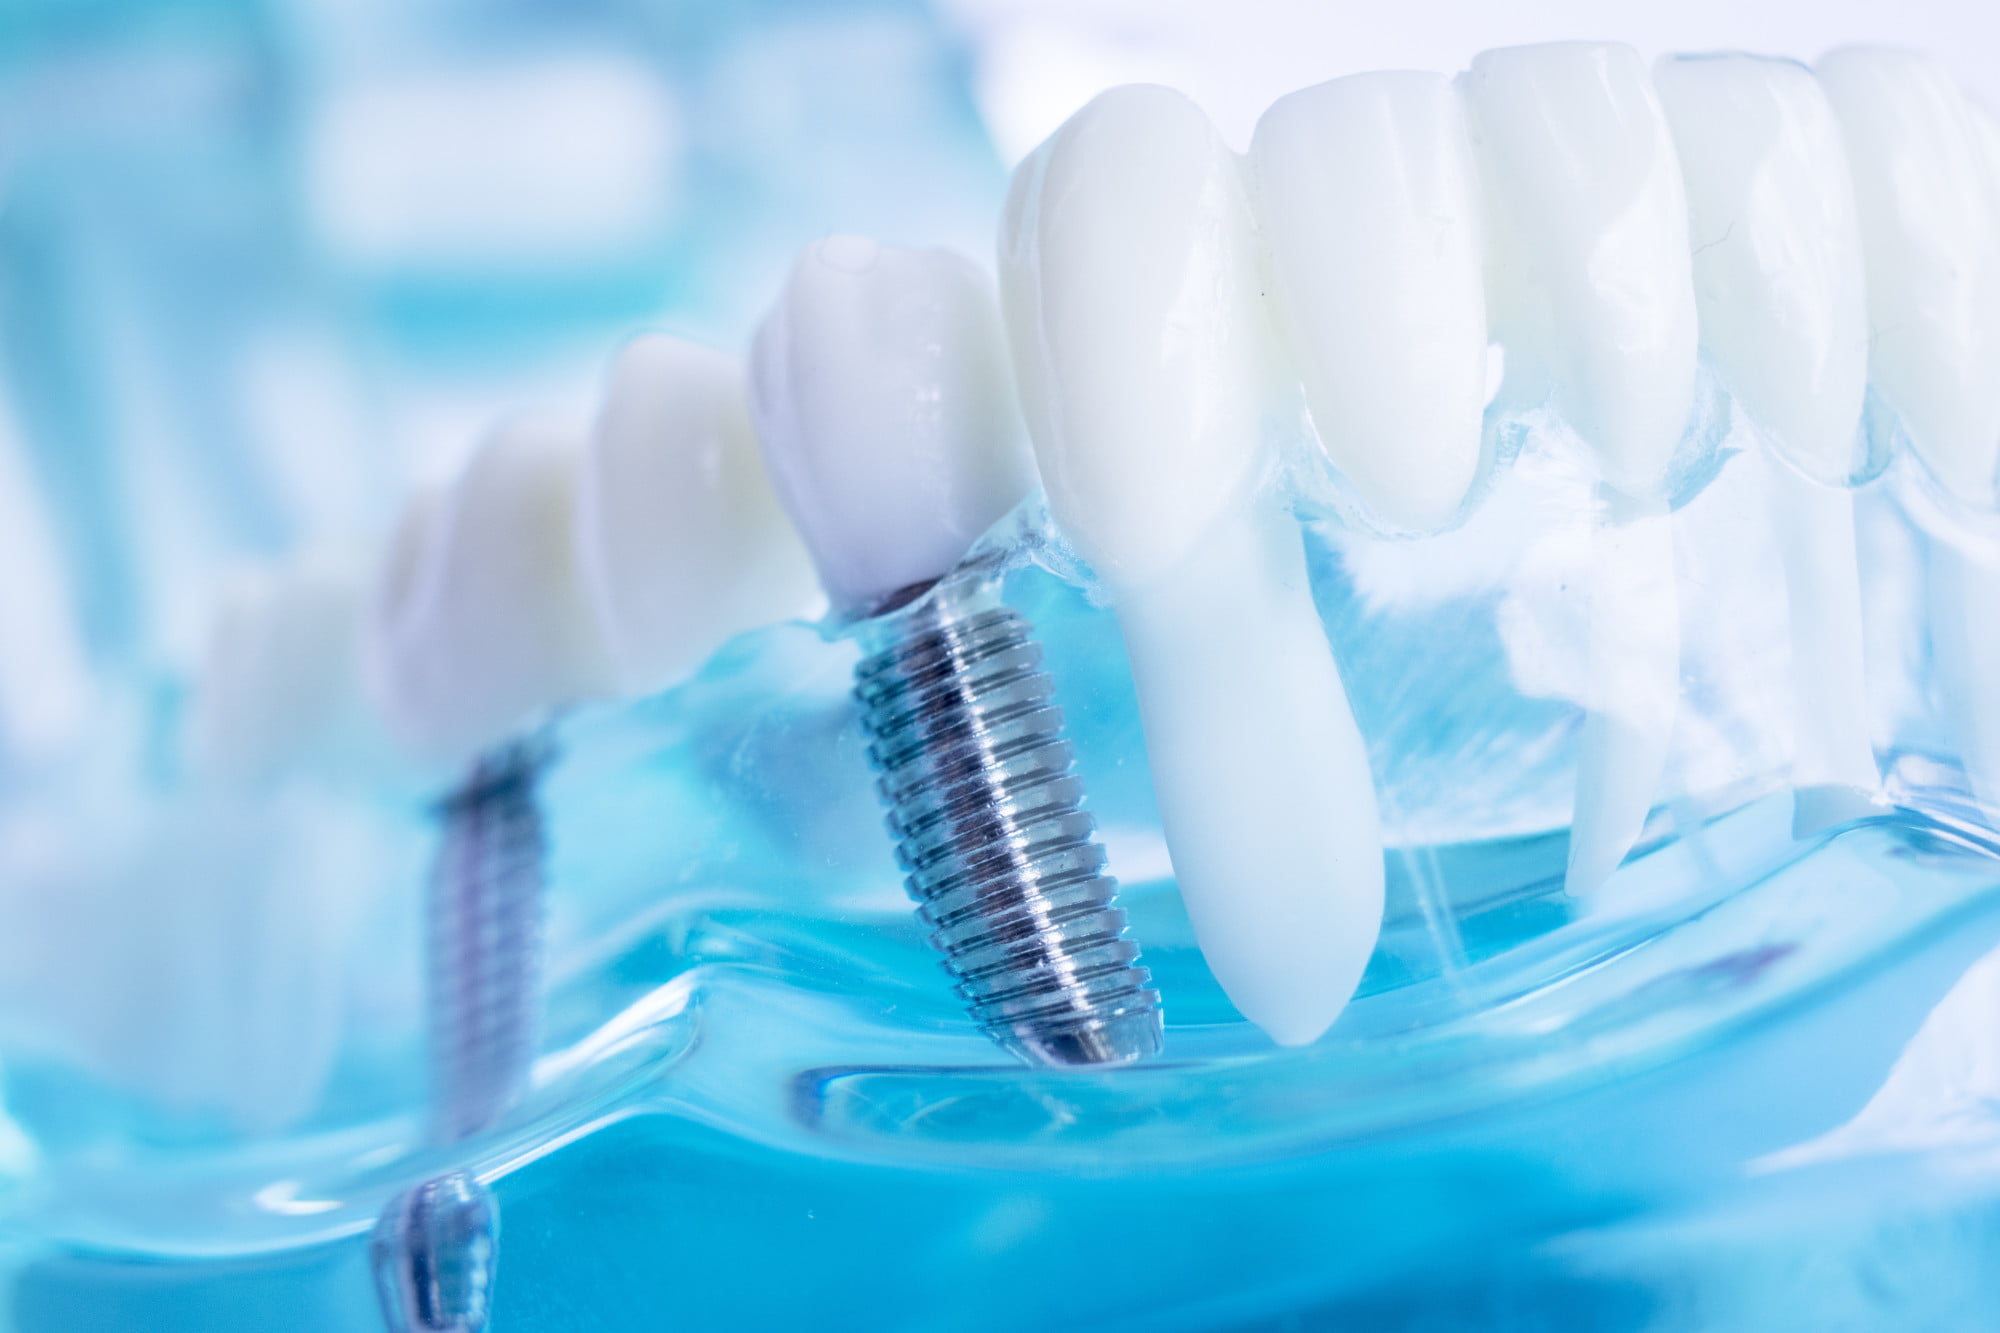 If you have one or more missing teeth, then you may want to consider dental implants. But what are dental implants exactly? Here's what you should know.